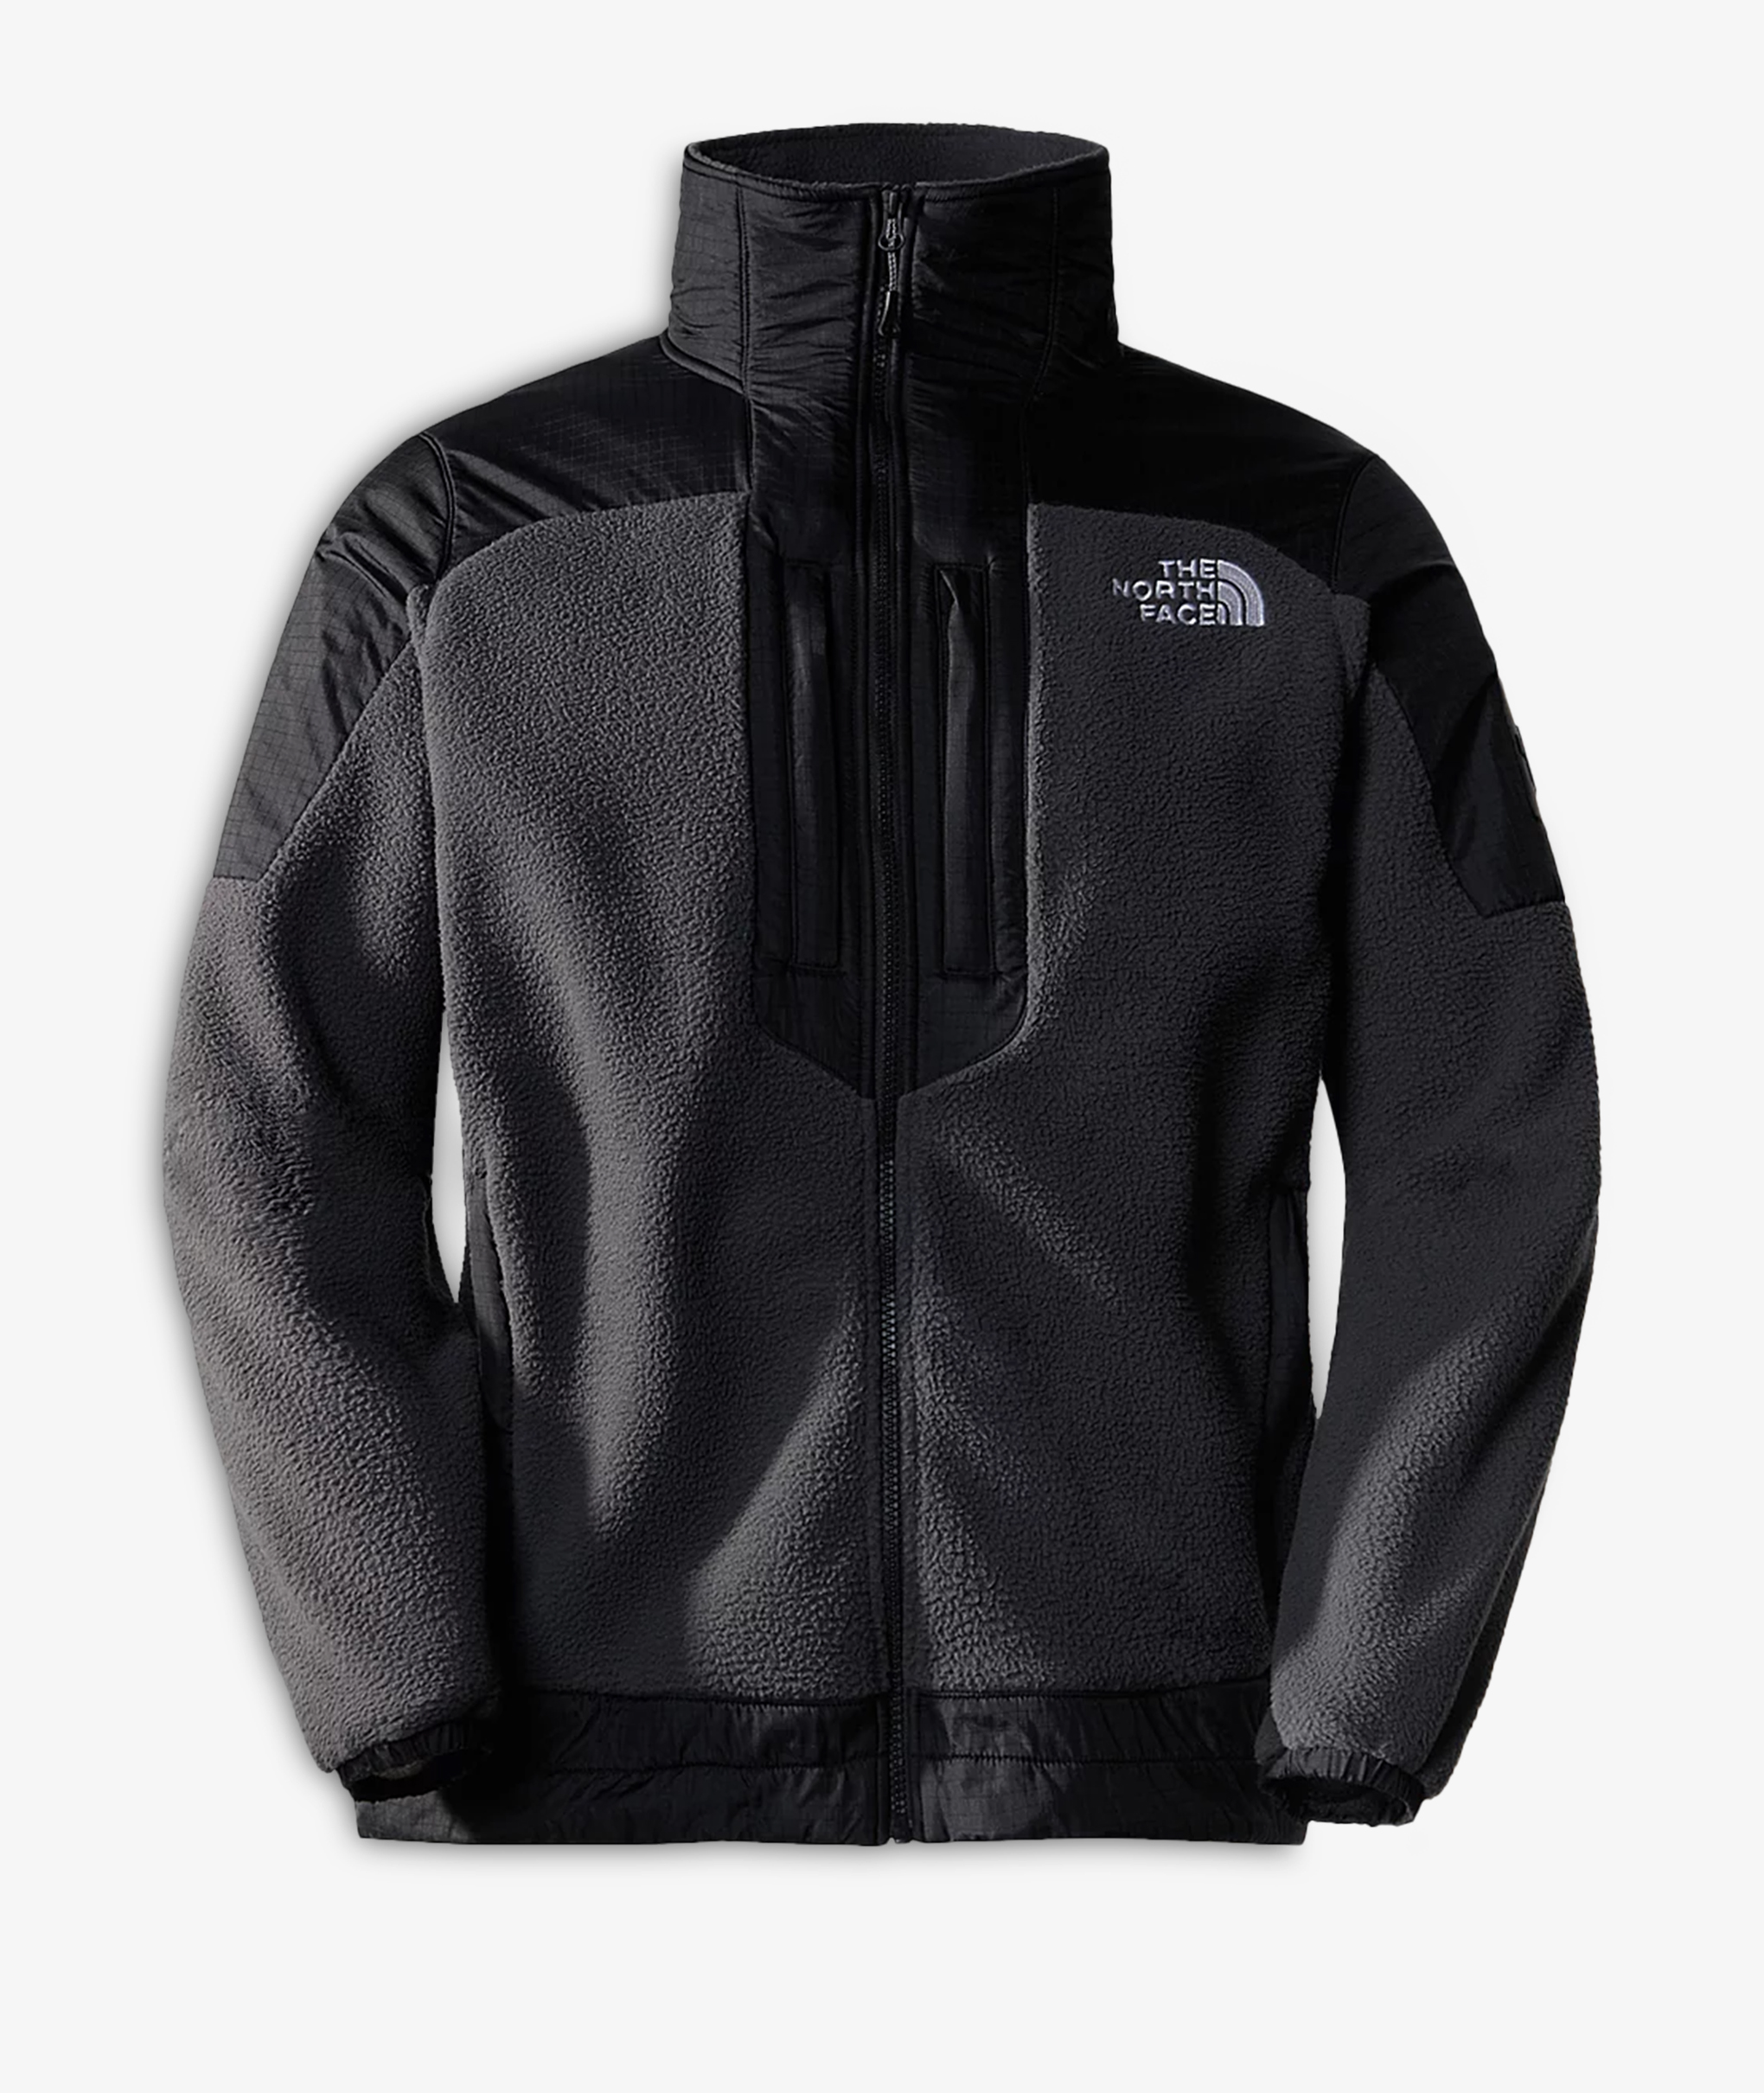 Norse Store  Shipping Worldwide - The North Face M FLEESKI Y2K JACKET -  ASPHLTGR/TNF